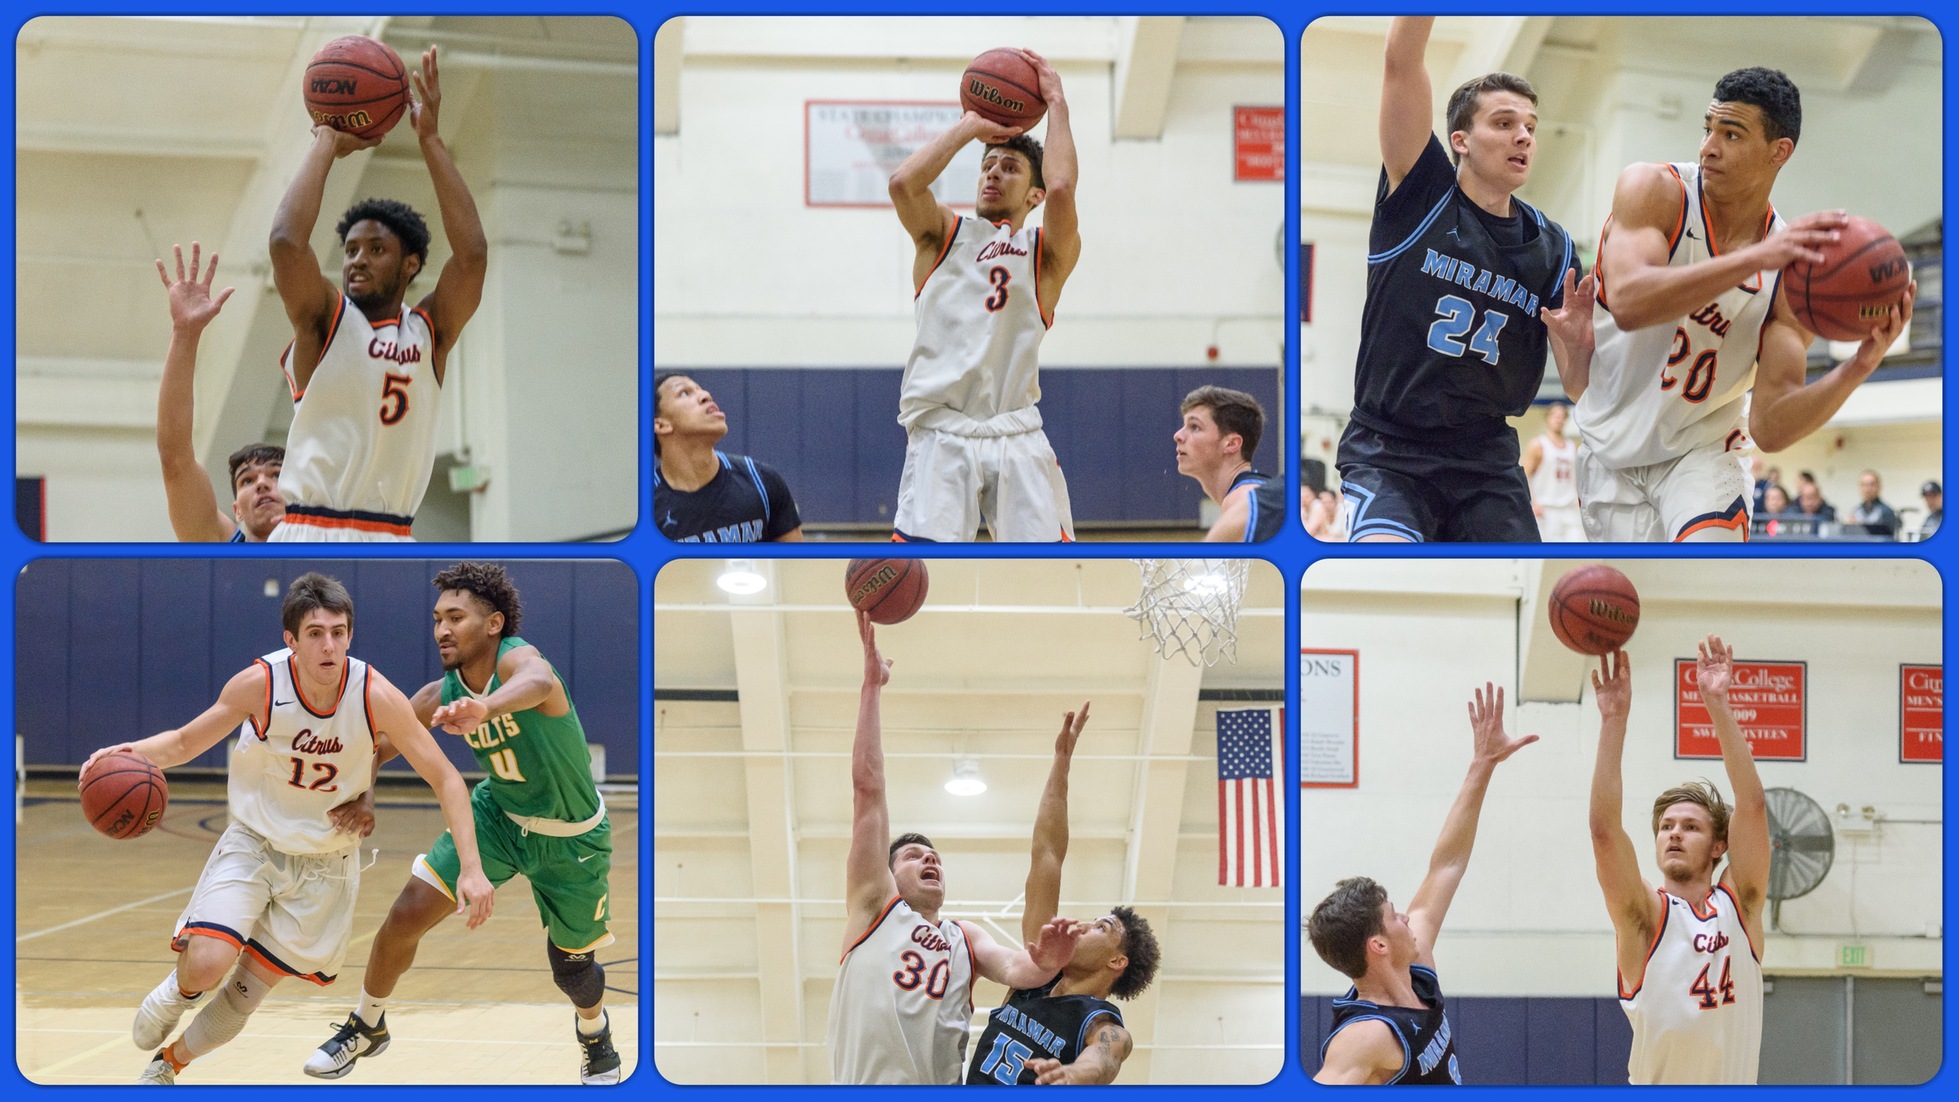 Citrus Basketball's All WSC East Conference players, clockwise from top left: Miles Crawford (1st team), Jeremy Smith (1st team, MVP), Kyle Gray (1st team), Austin Clarke (2nd team), Quintin Bailey (2nd team) and Alexios Ziska (2nd team). Photo credit: Ricky Lin